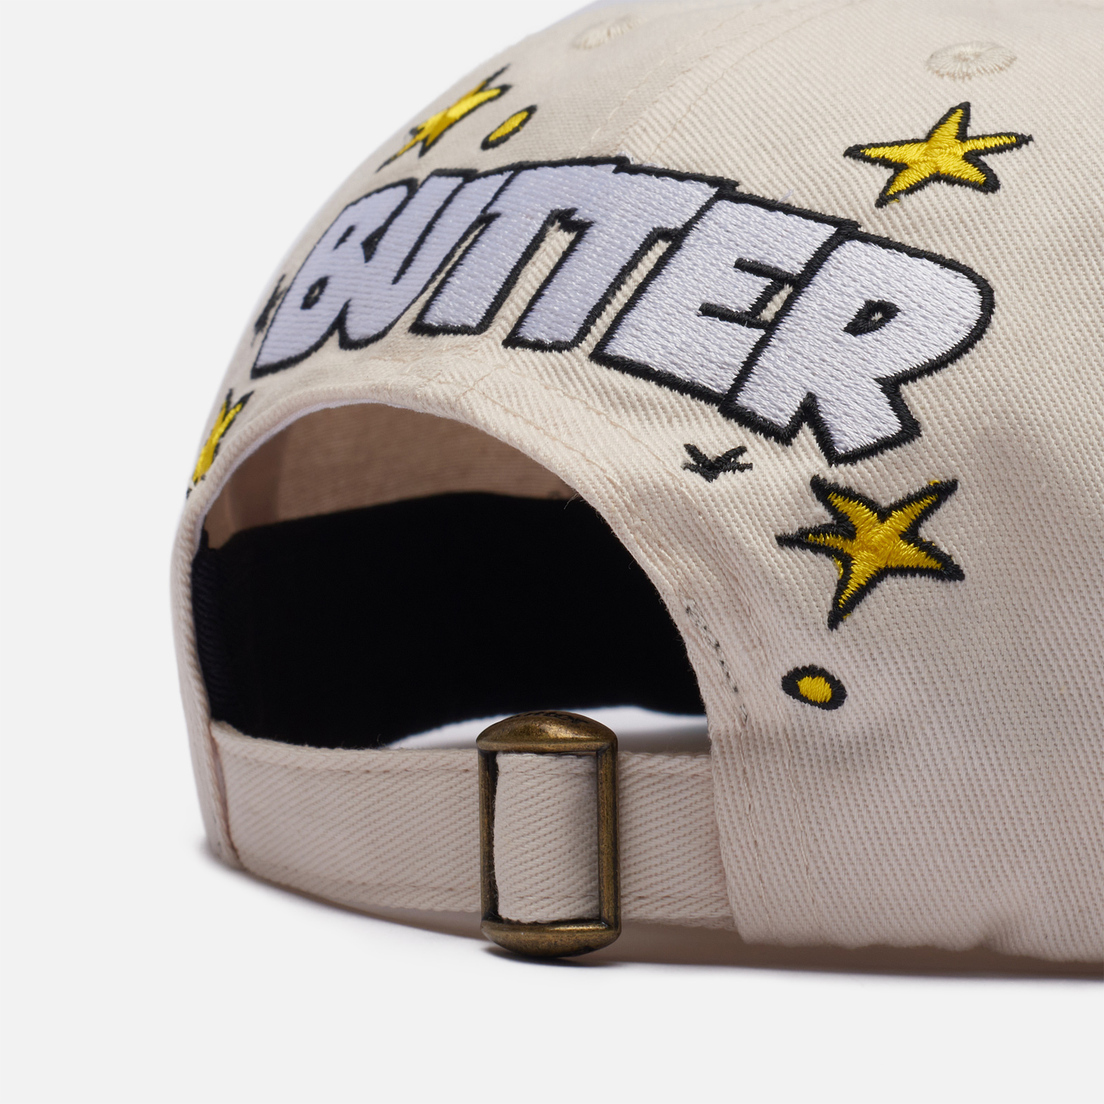 Butter Goods Кепка x The Smurfs Band 6 Panel